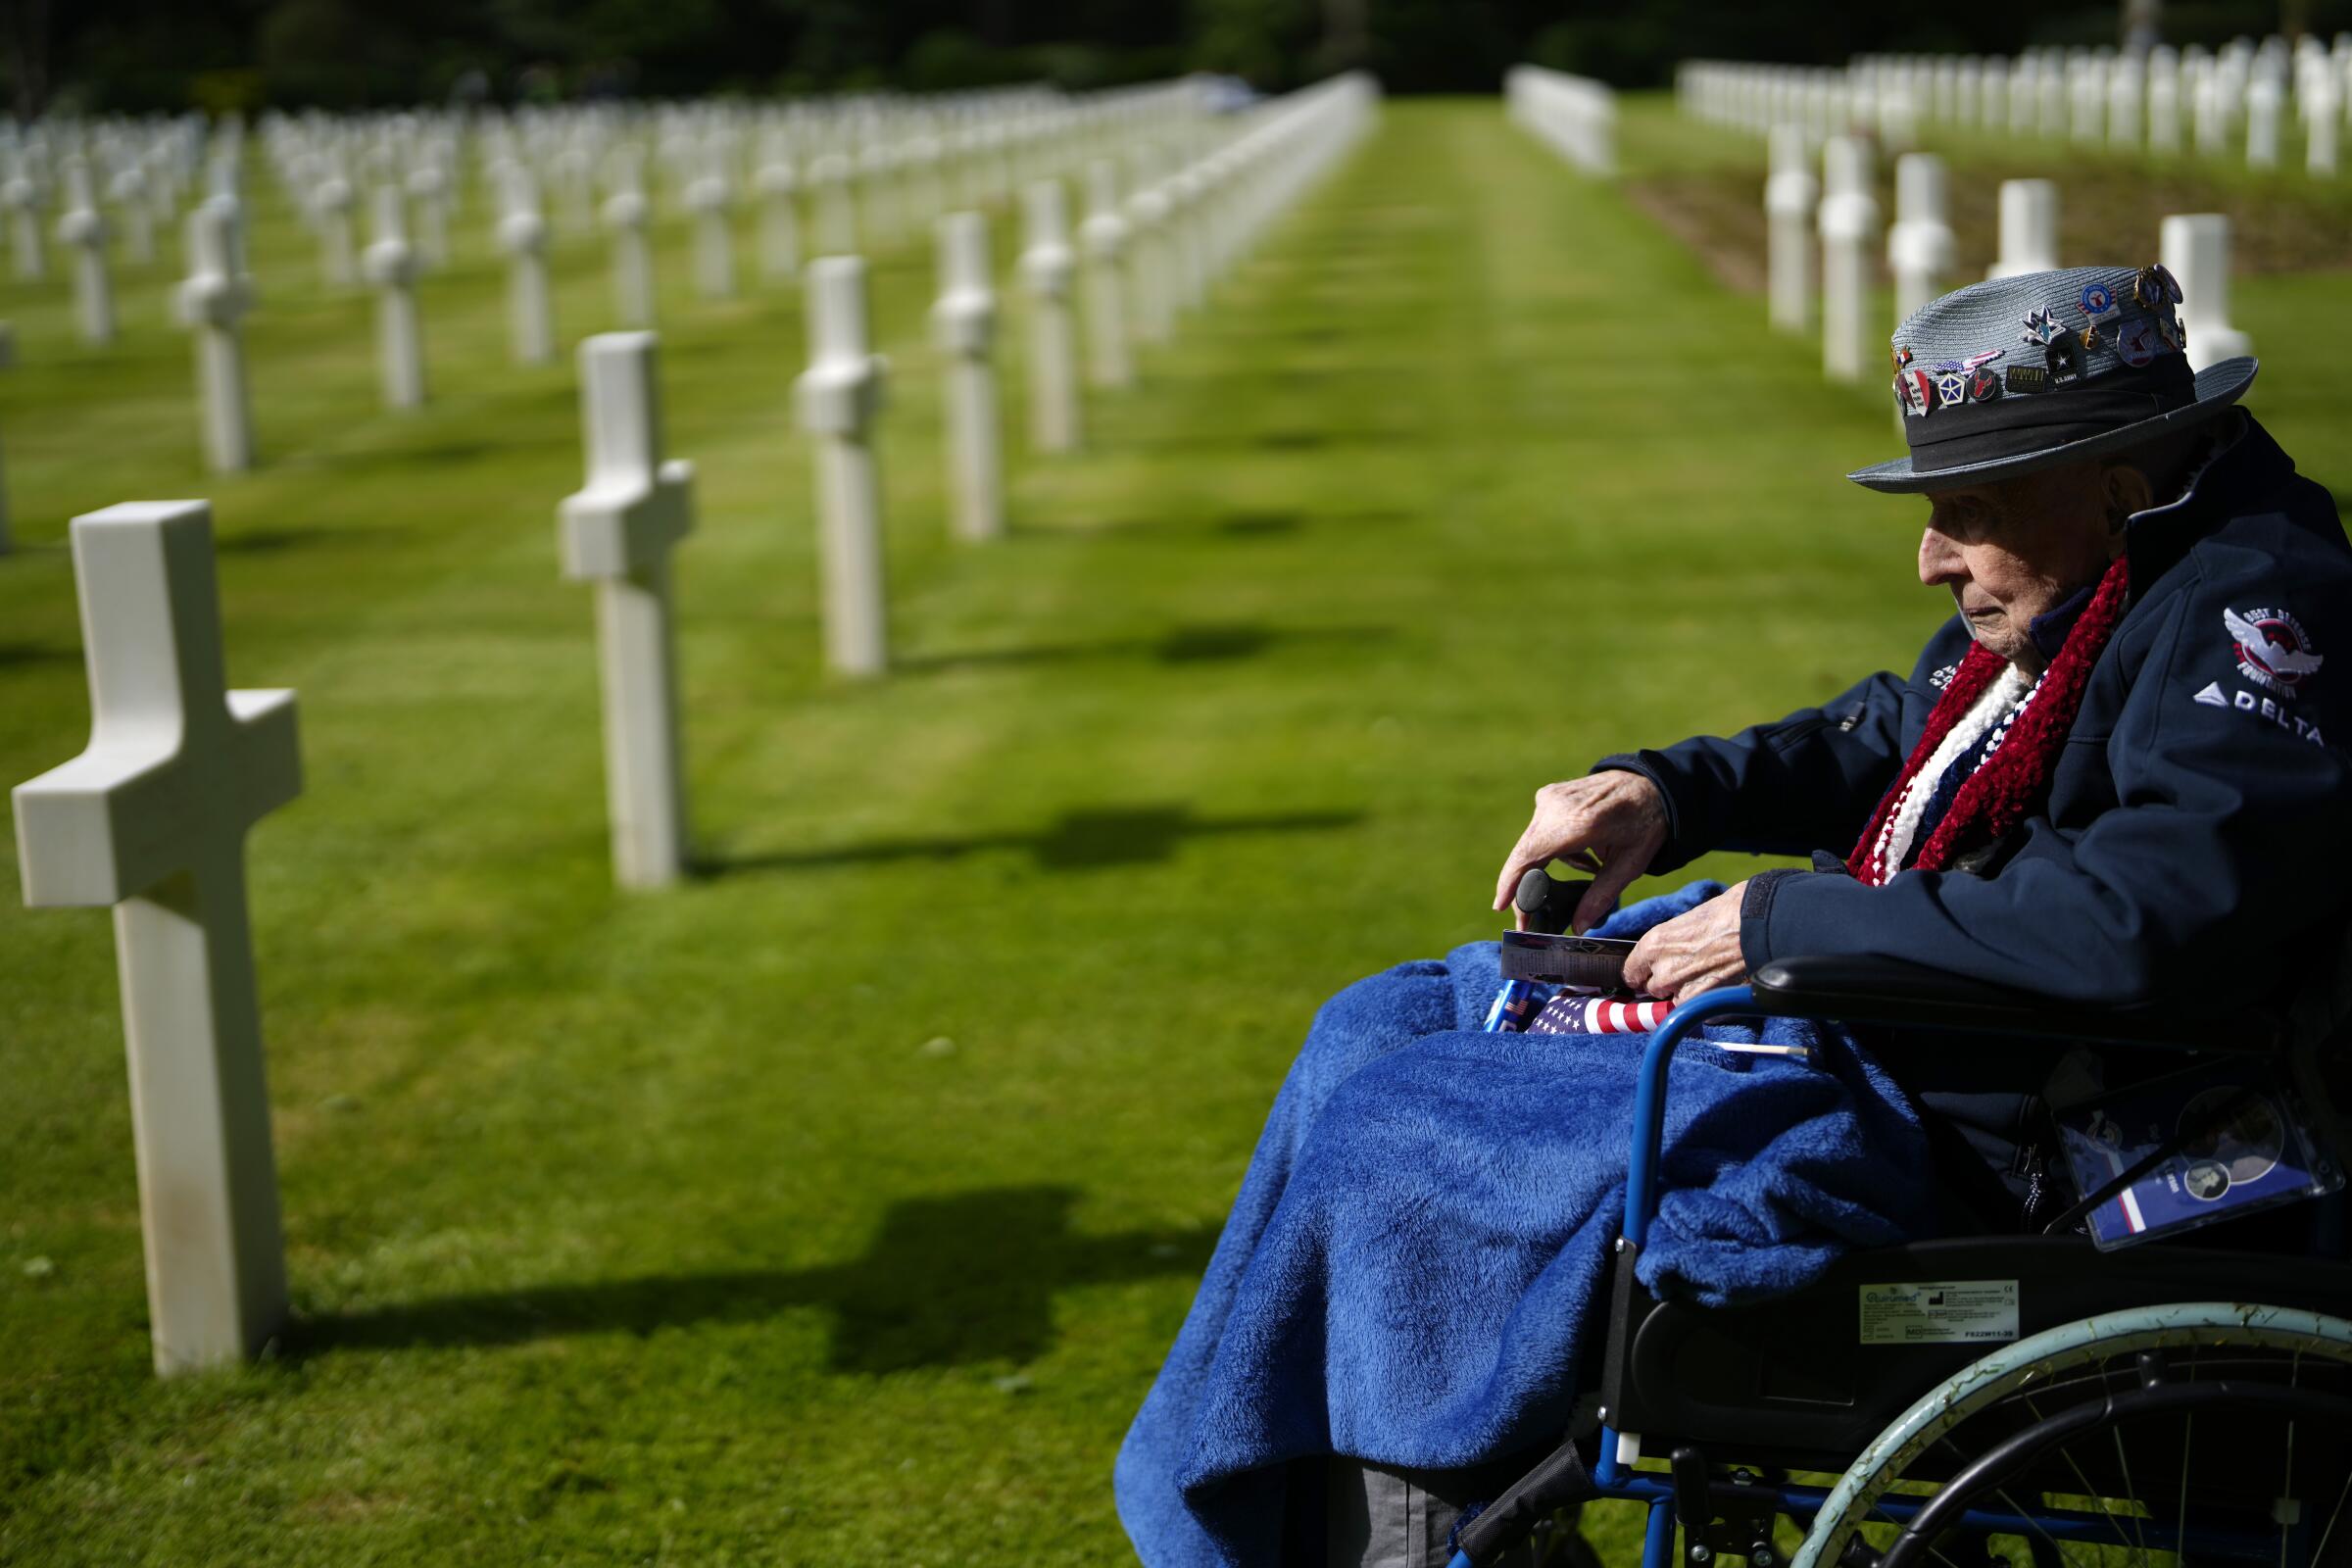 D-Day veteran Jake Larson looks at a grave while sitting in a wheelchair at a cemetery.